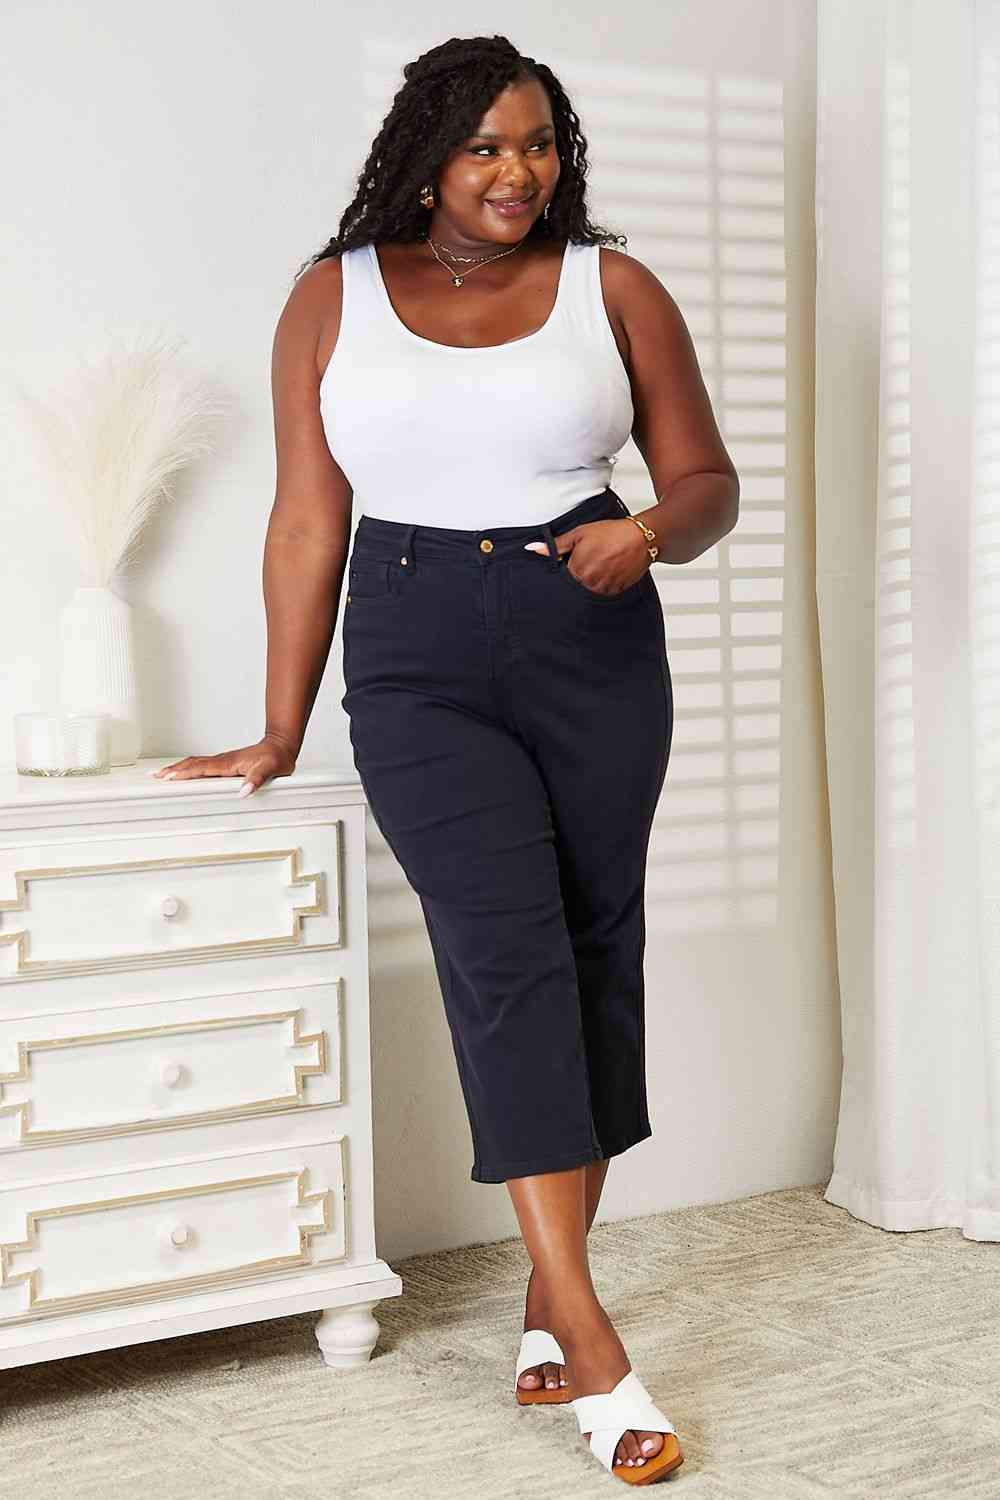 These crop jeans seamlessly combine modern style with body-enhancing features. Engineered with tummy control technology, these jeans provide a slimming effect while offering comfortable support. The high waist design flatters the figure and elongates the silhouette.